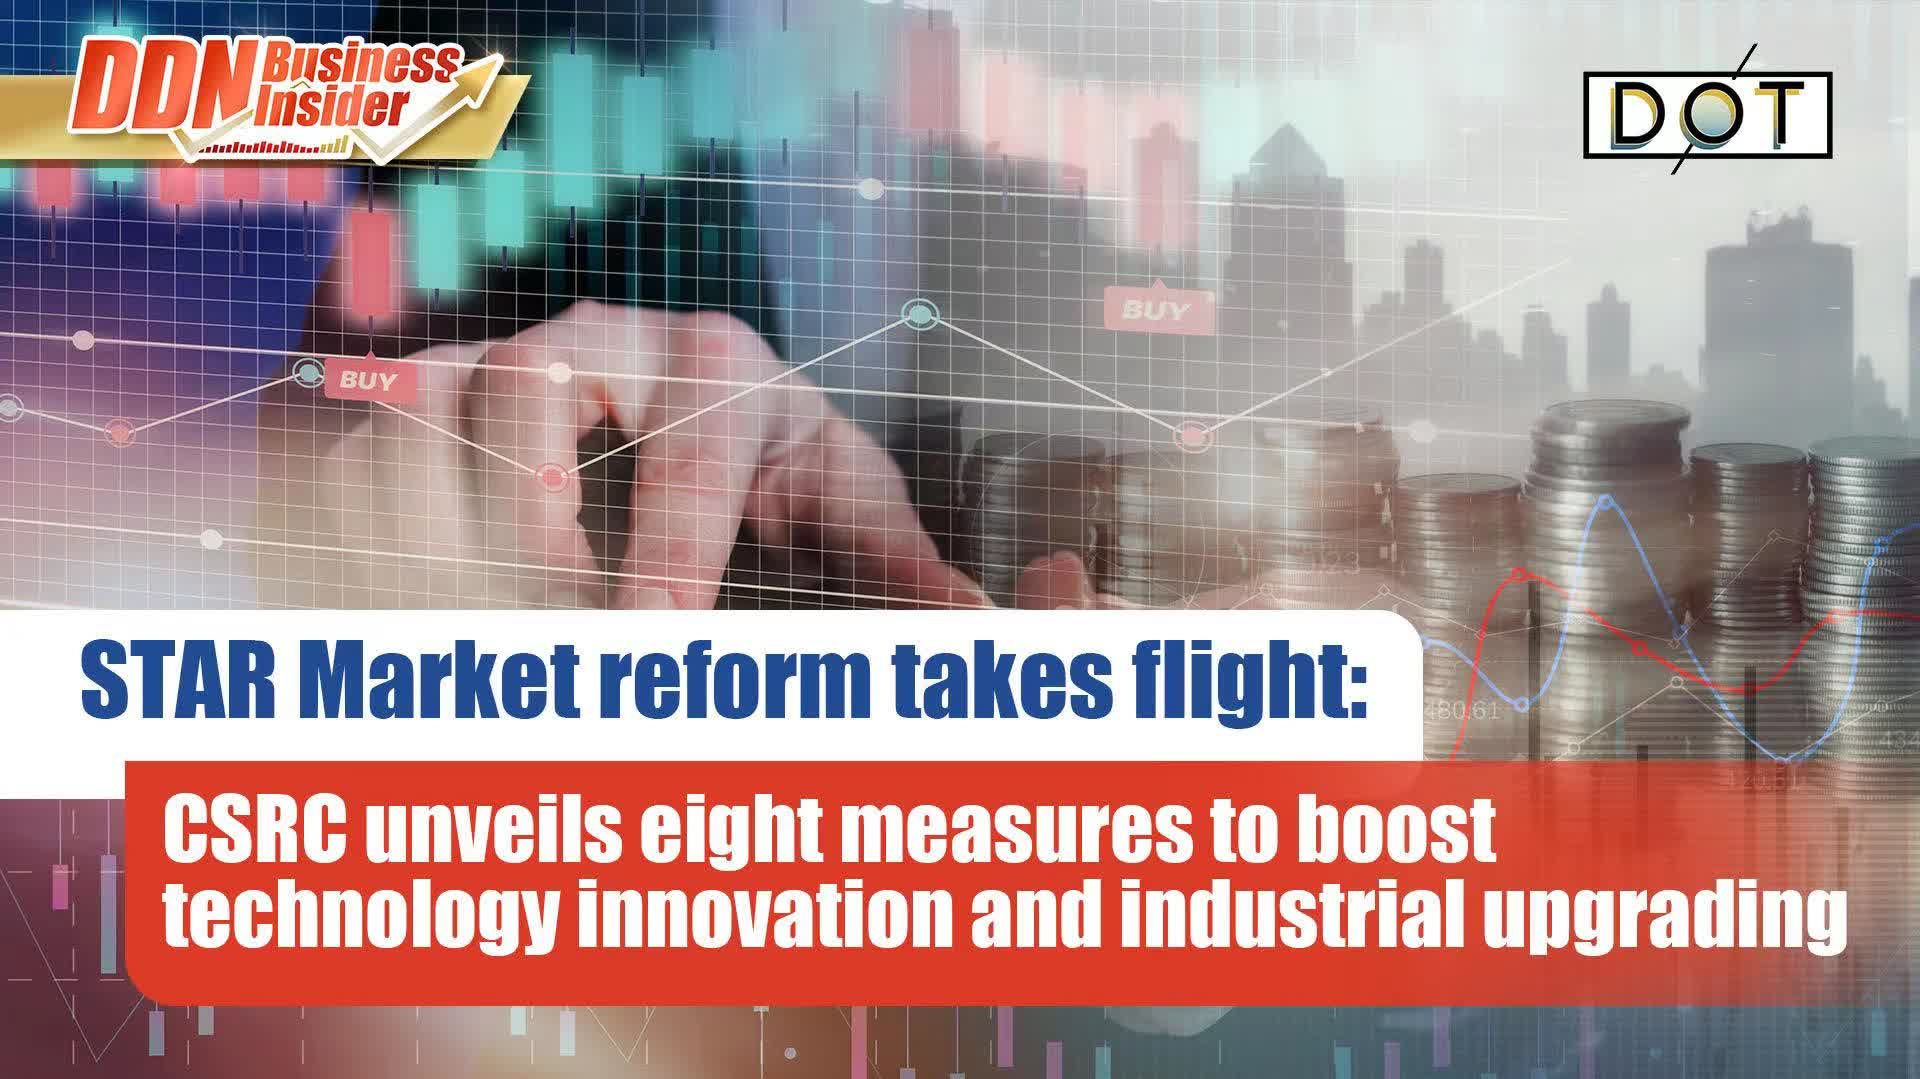 DDN Bussiness Insider | STAR Market reform takes flight: CSRC unveils eight measures to boost technology innovation and industrial upgrading